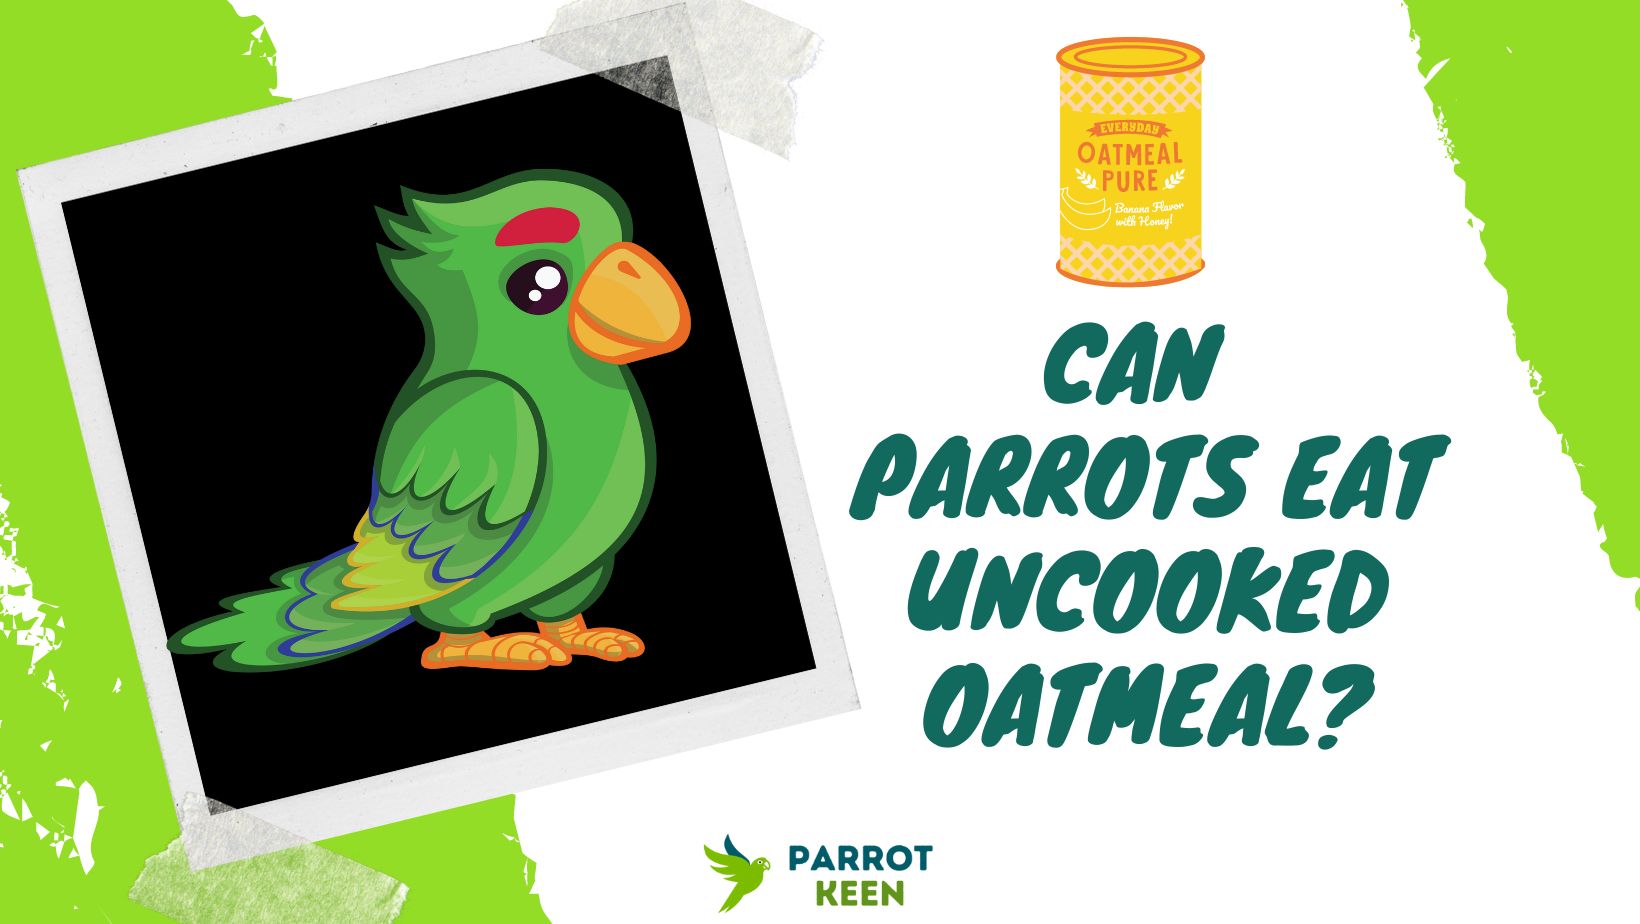 Can Parrots Eat Uncooked Oatmeal